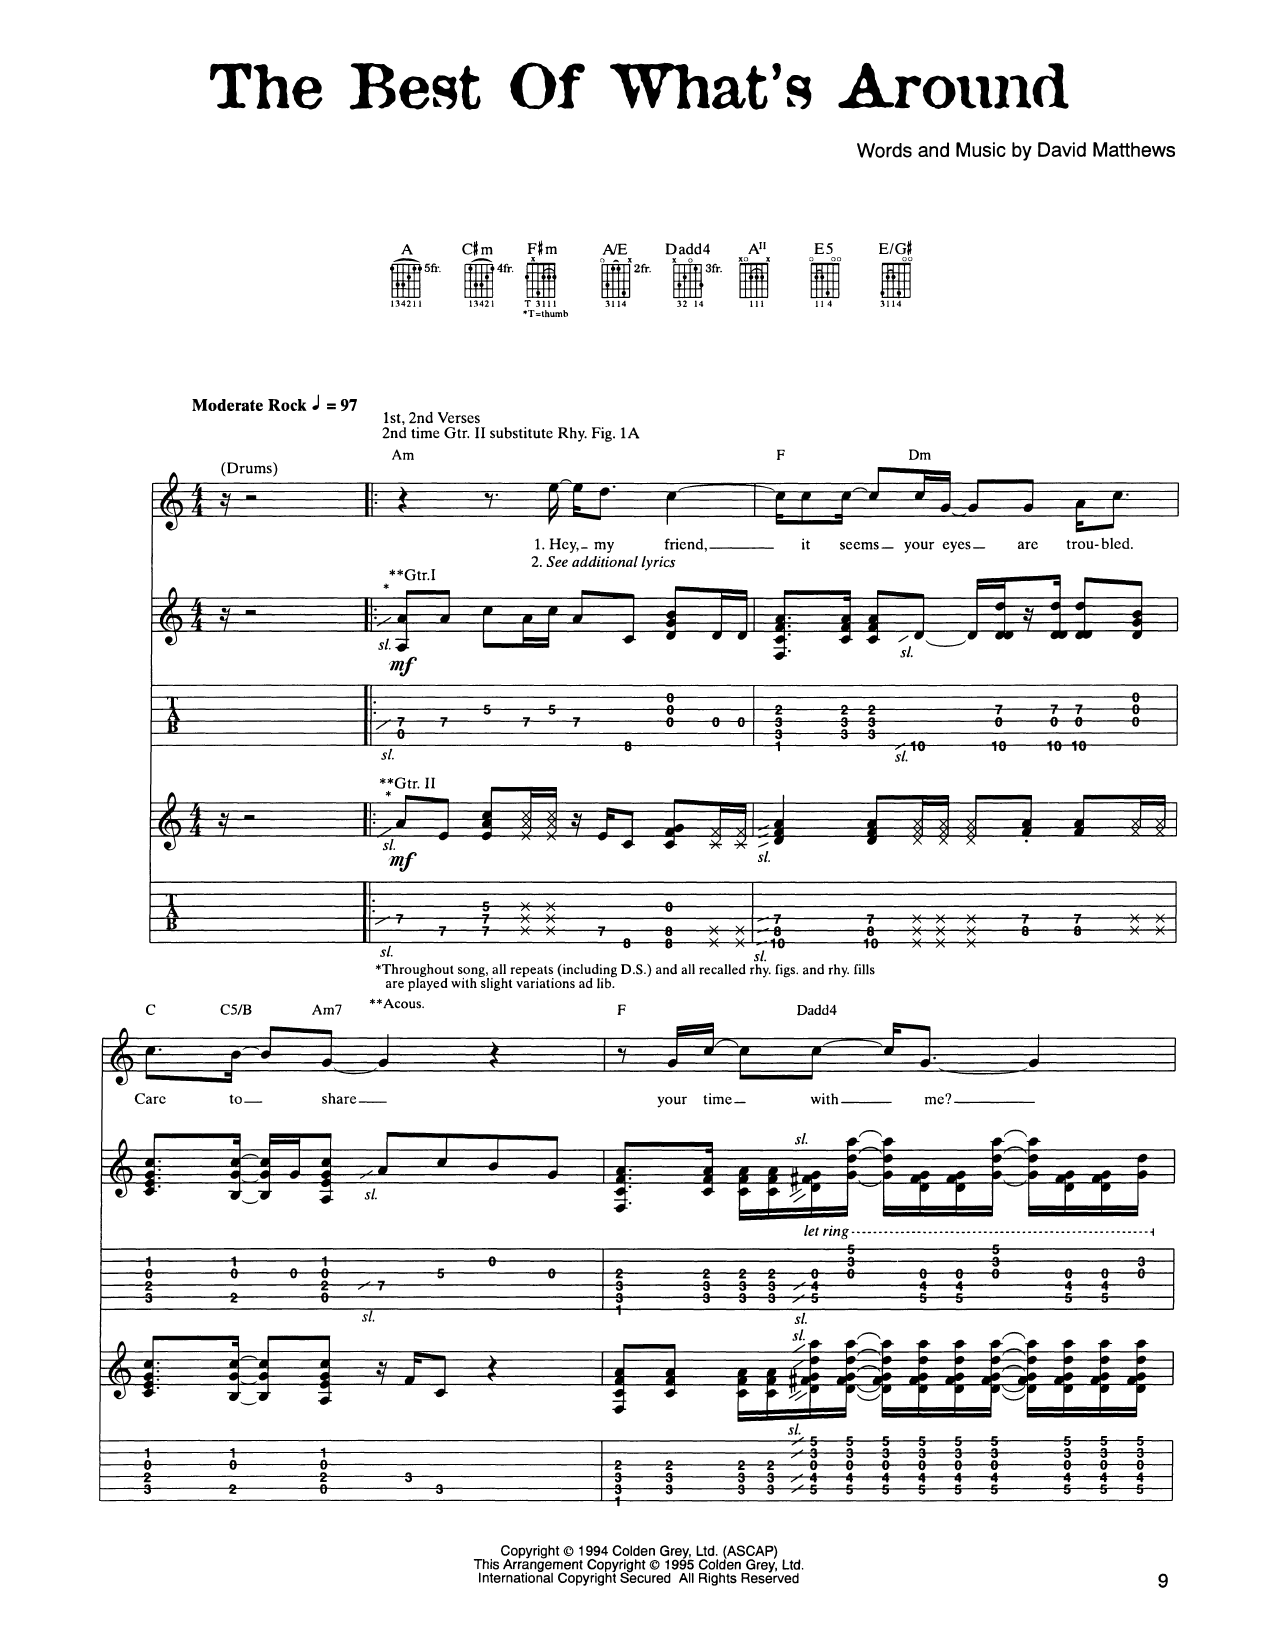 Download Dave Matthews Band The Best Of What's Around Sheet Music